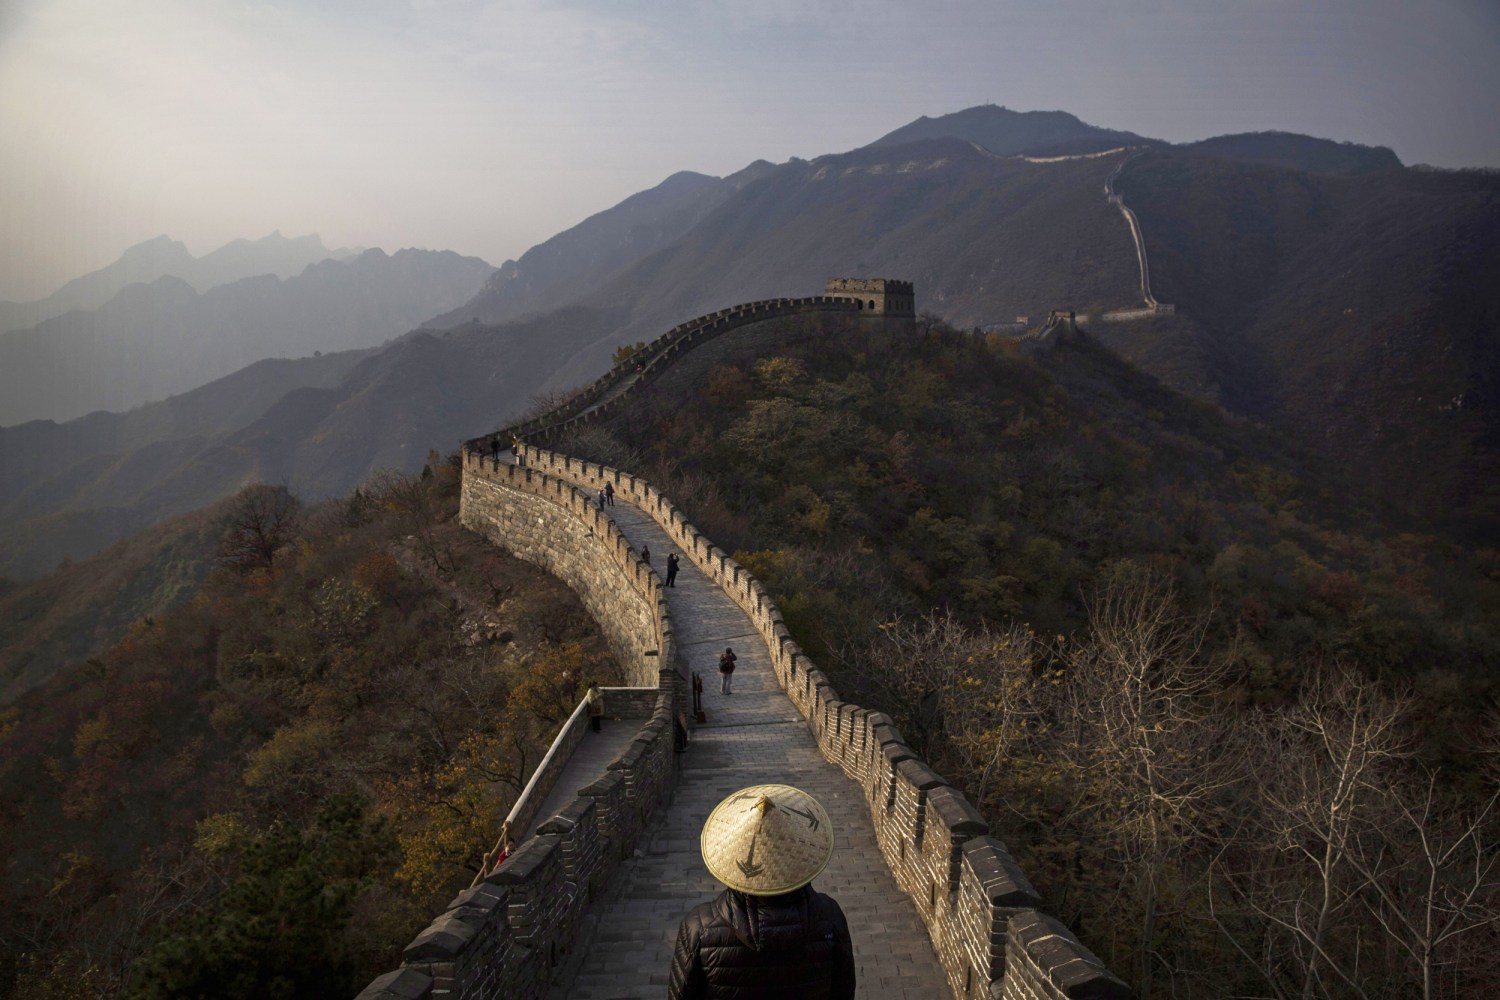 How Big is the Great Wall of China